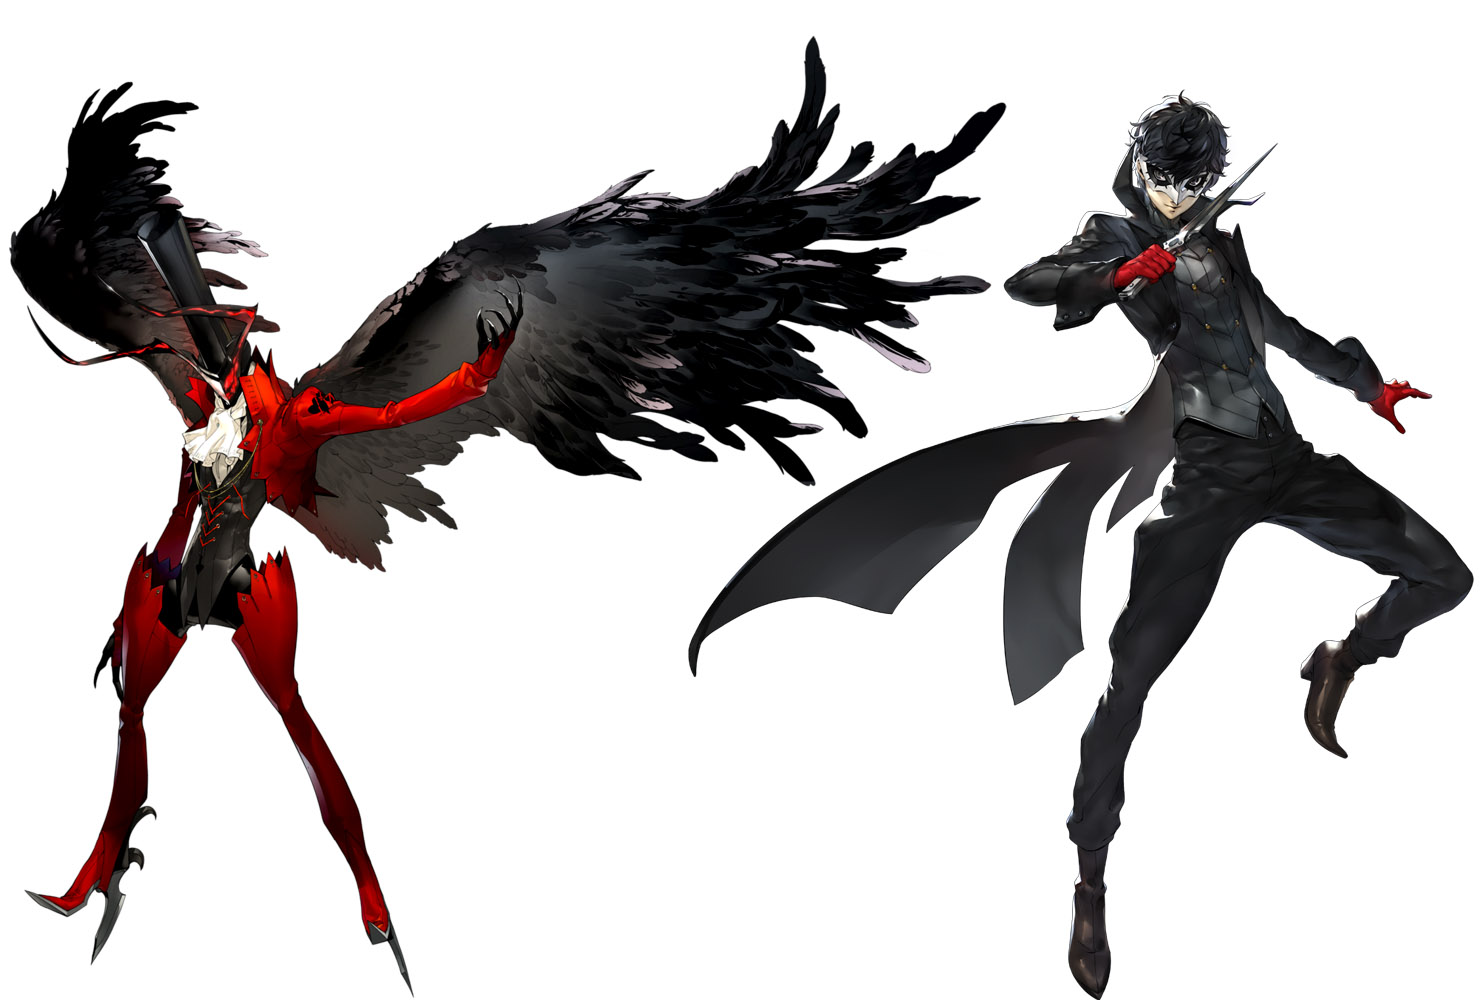 The Gentleman Thief Who Inspired Persona 5’s Killer Look